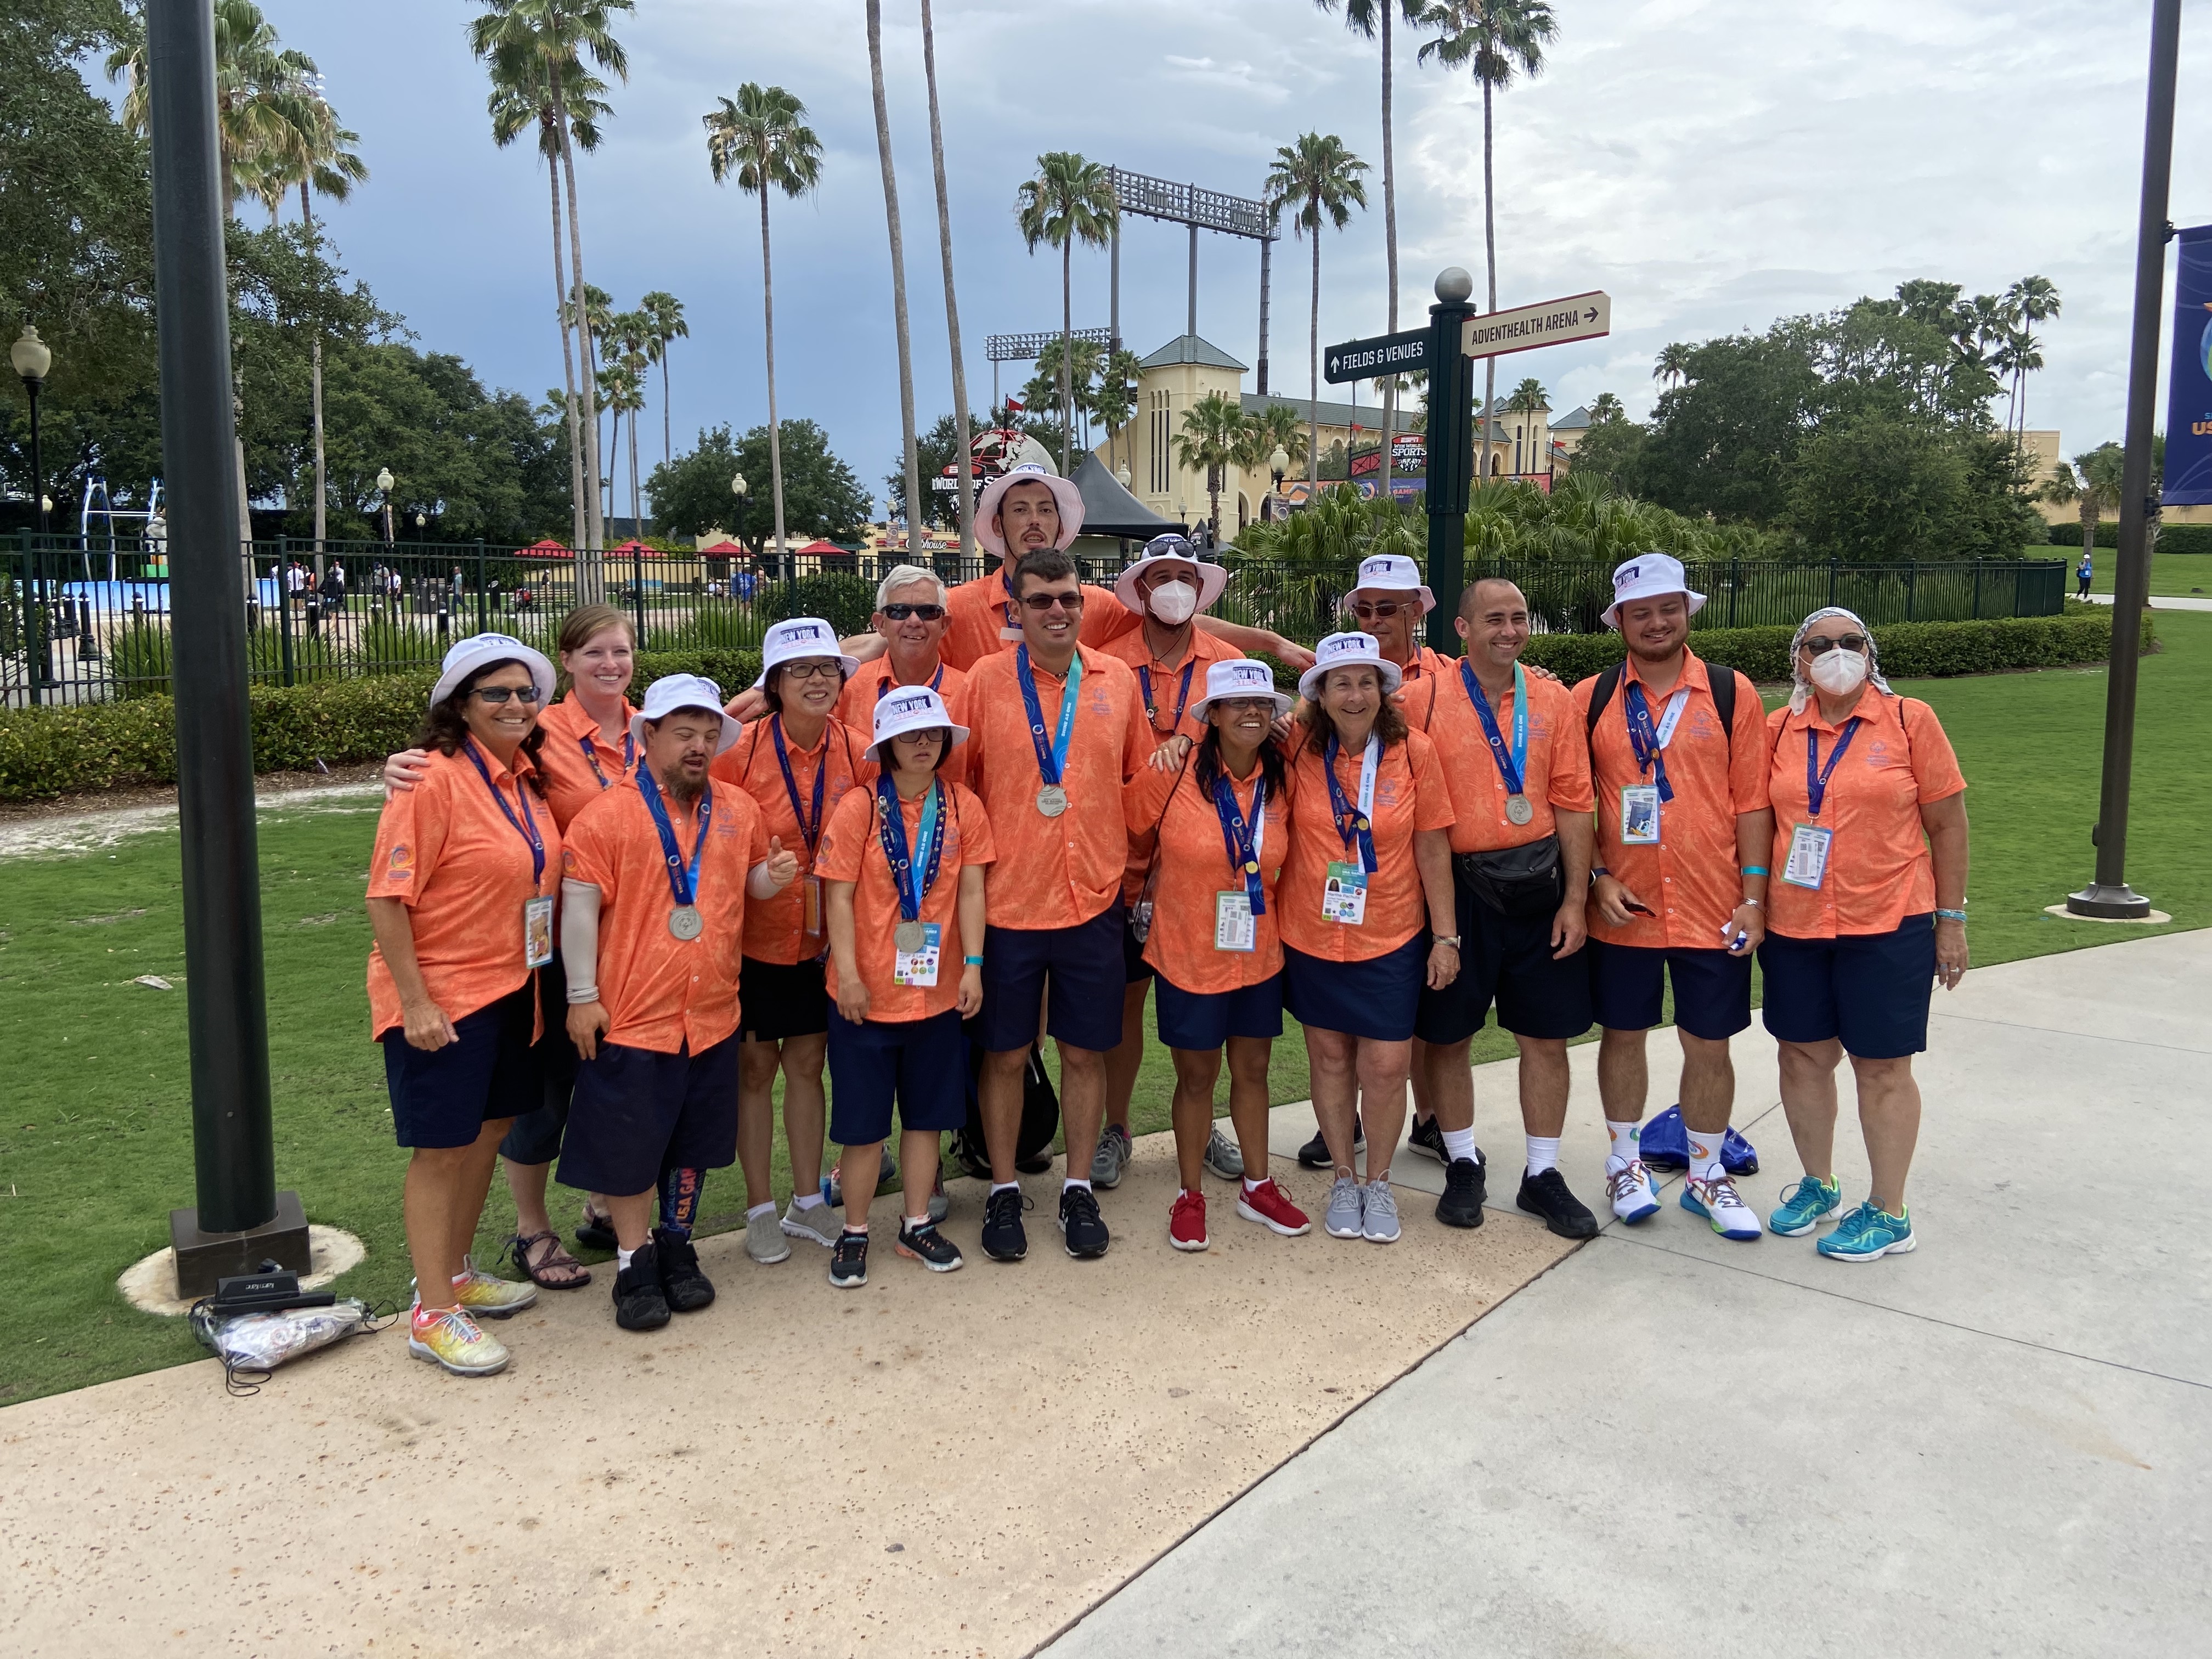 Group photo of NYS Special Olympic athletes and volunteers in Orlando, FL (June 2022)